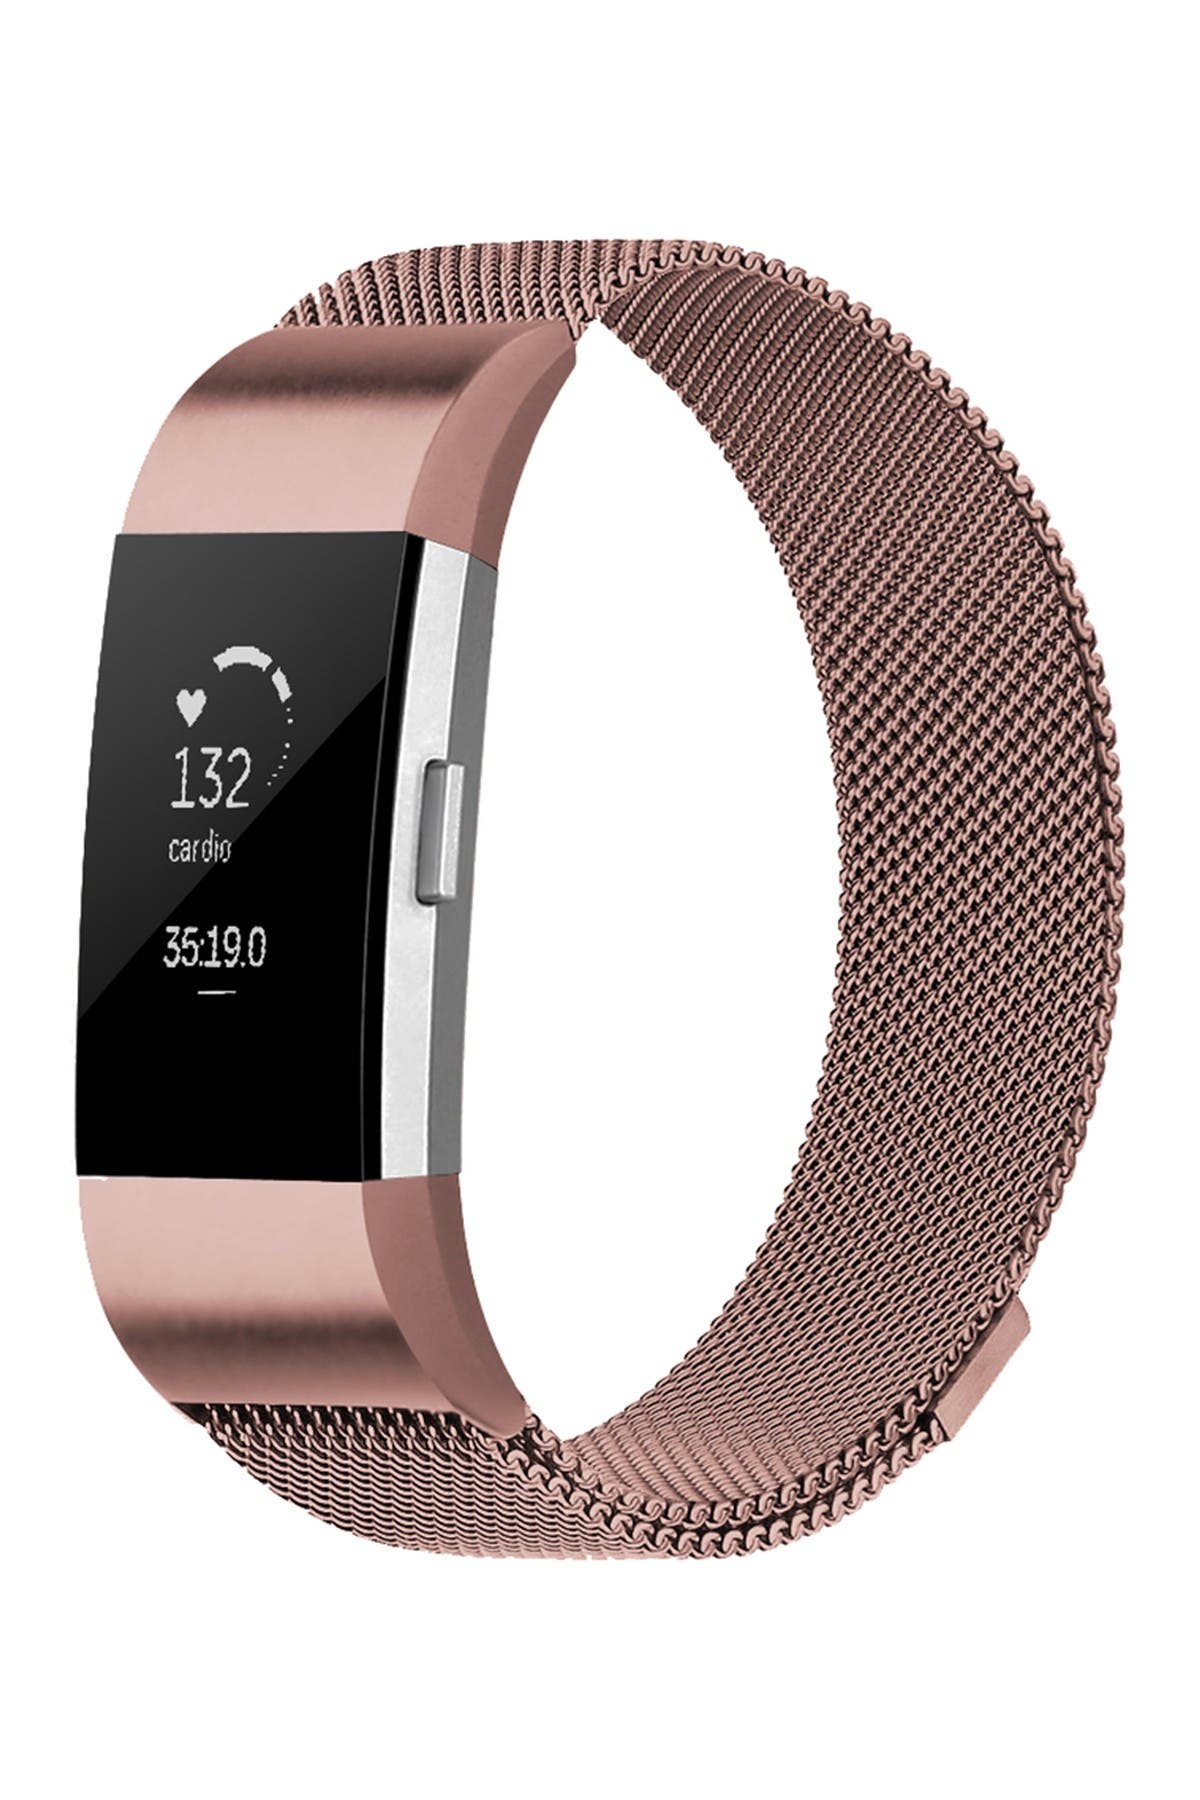 POSH TECH | Large Stainless Steel Band 